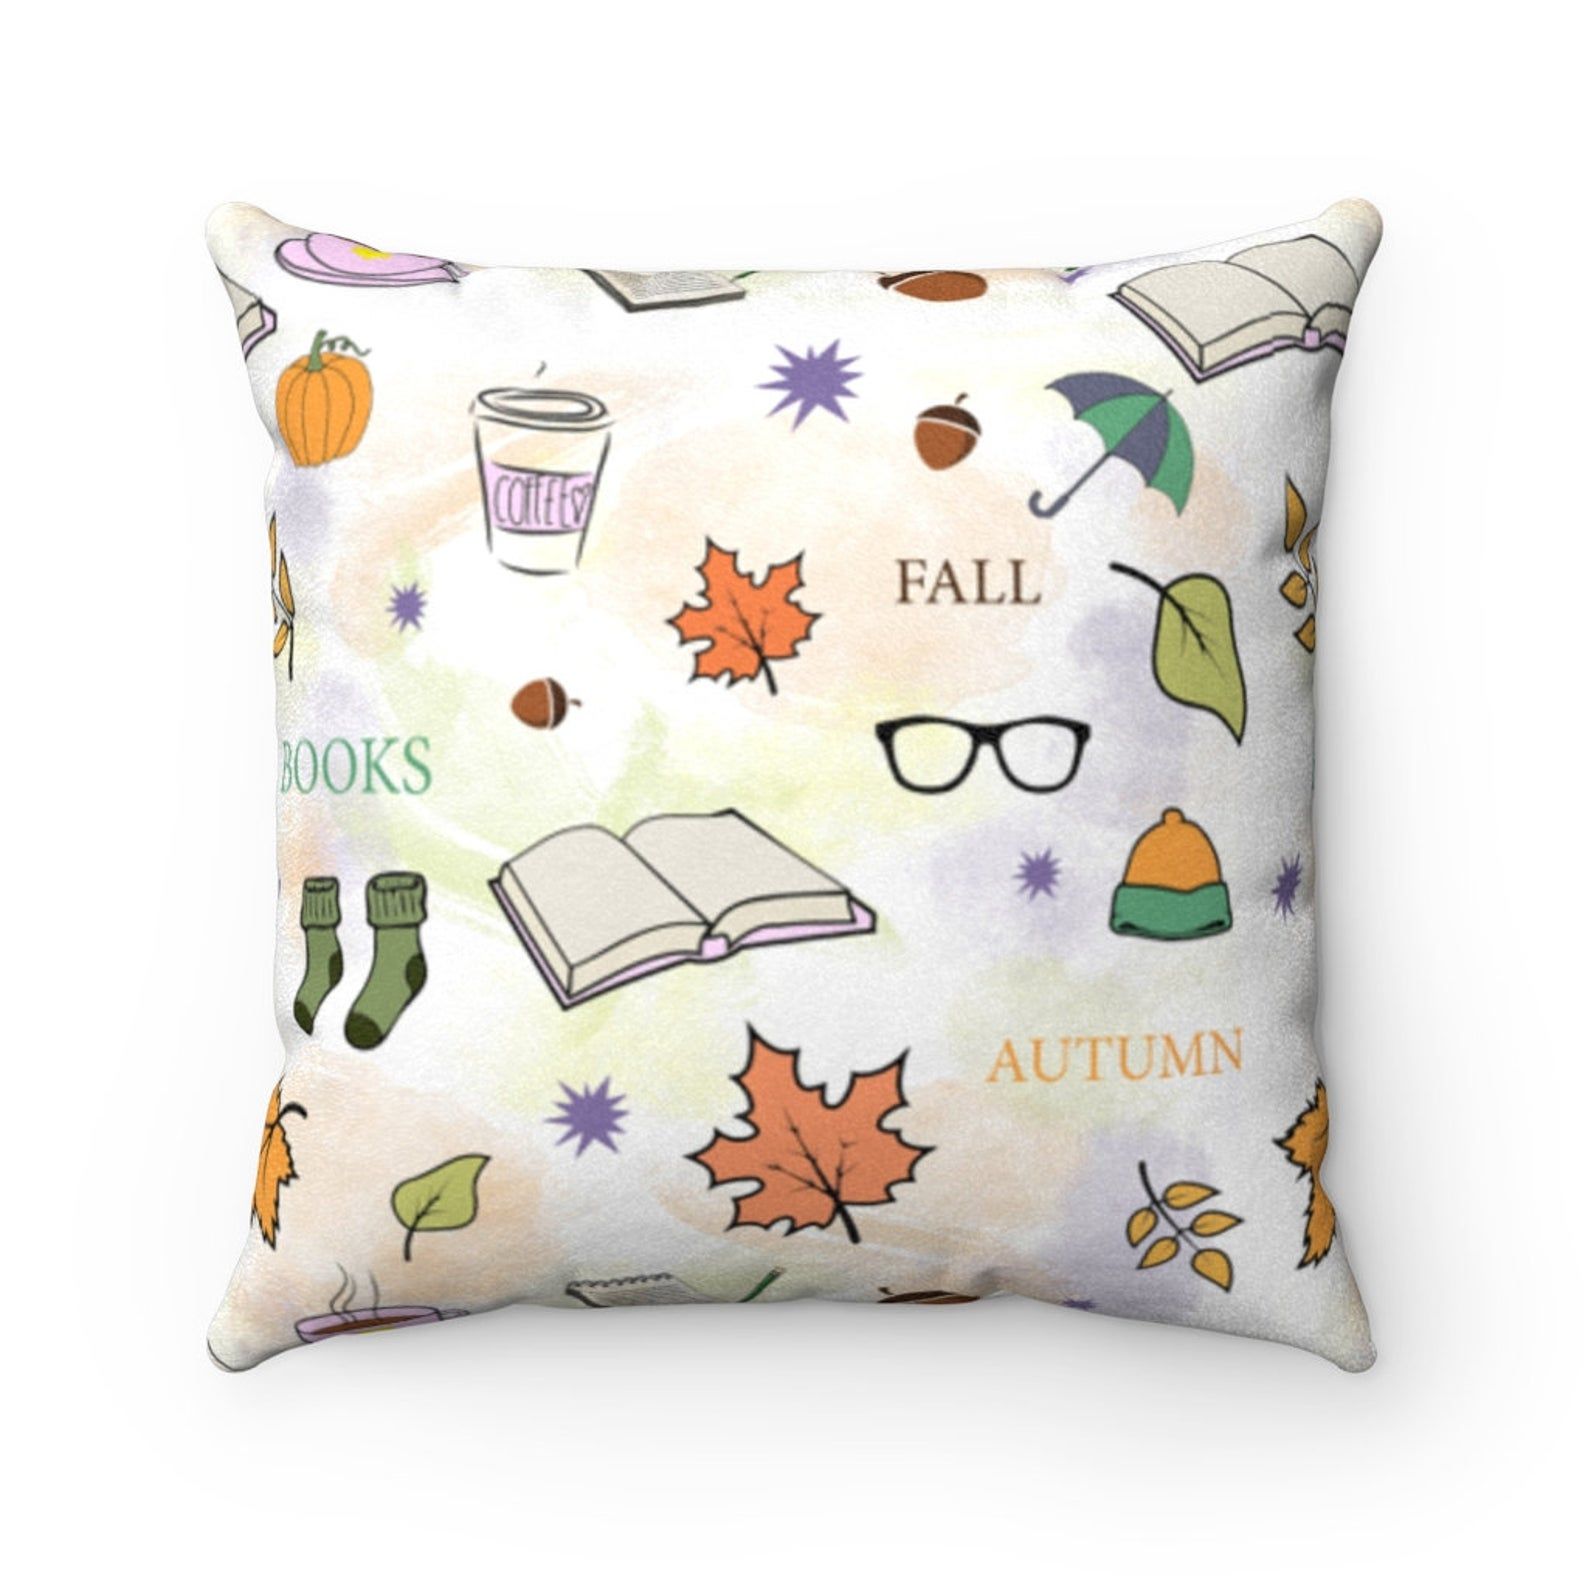 Image of a white throw pillow with fall images, including books, acorns, leaves, and cozy socks. 